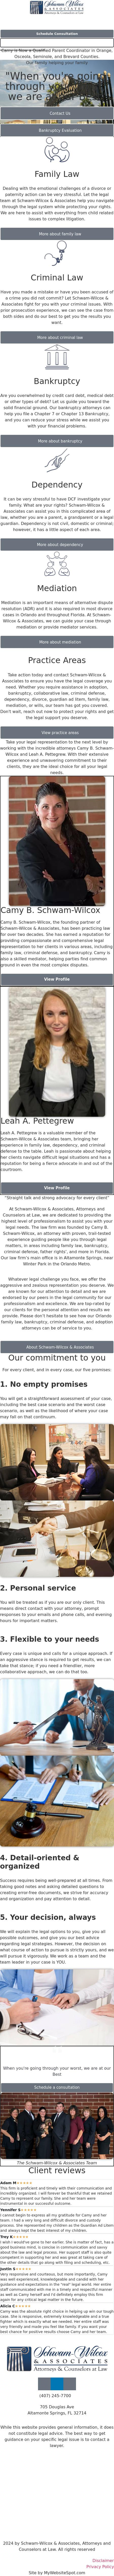 Schwam-Wilcox & Associates, Attorneys and Counselors at Law - Leesburg FL Lawyers